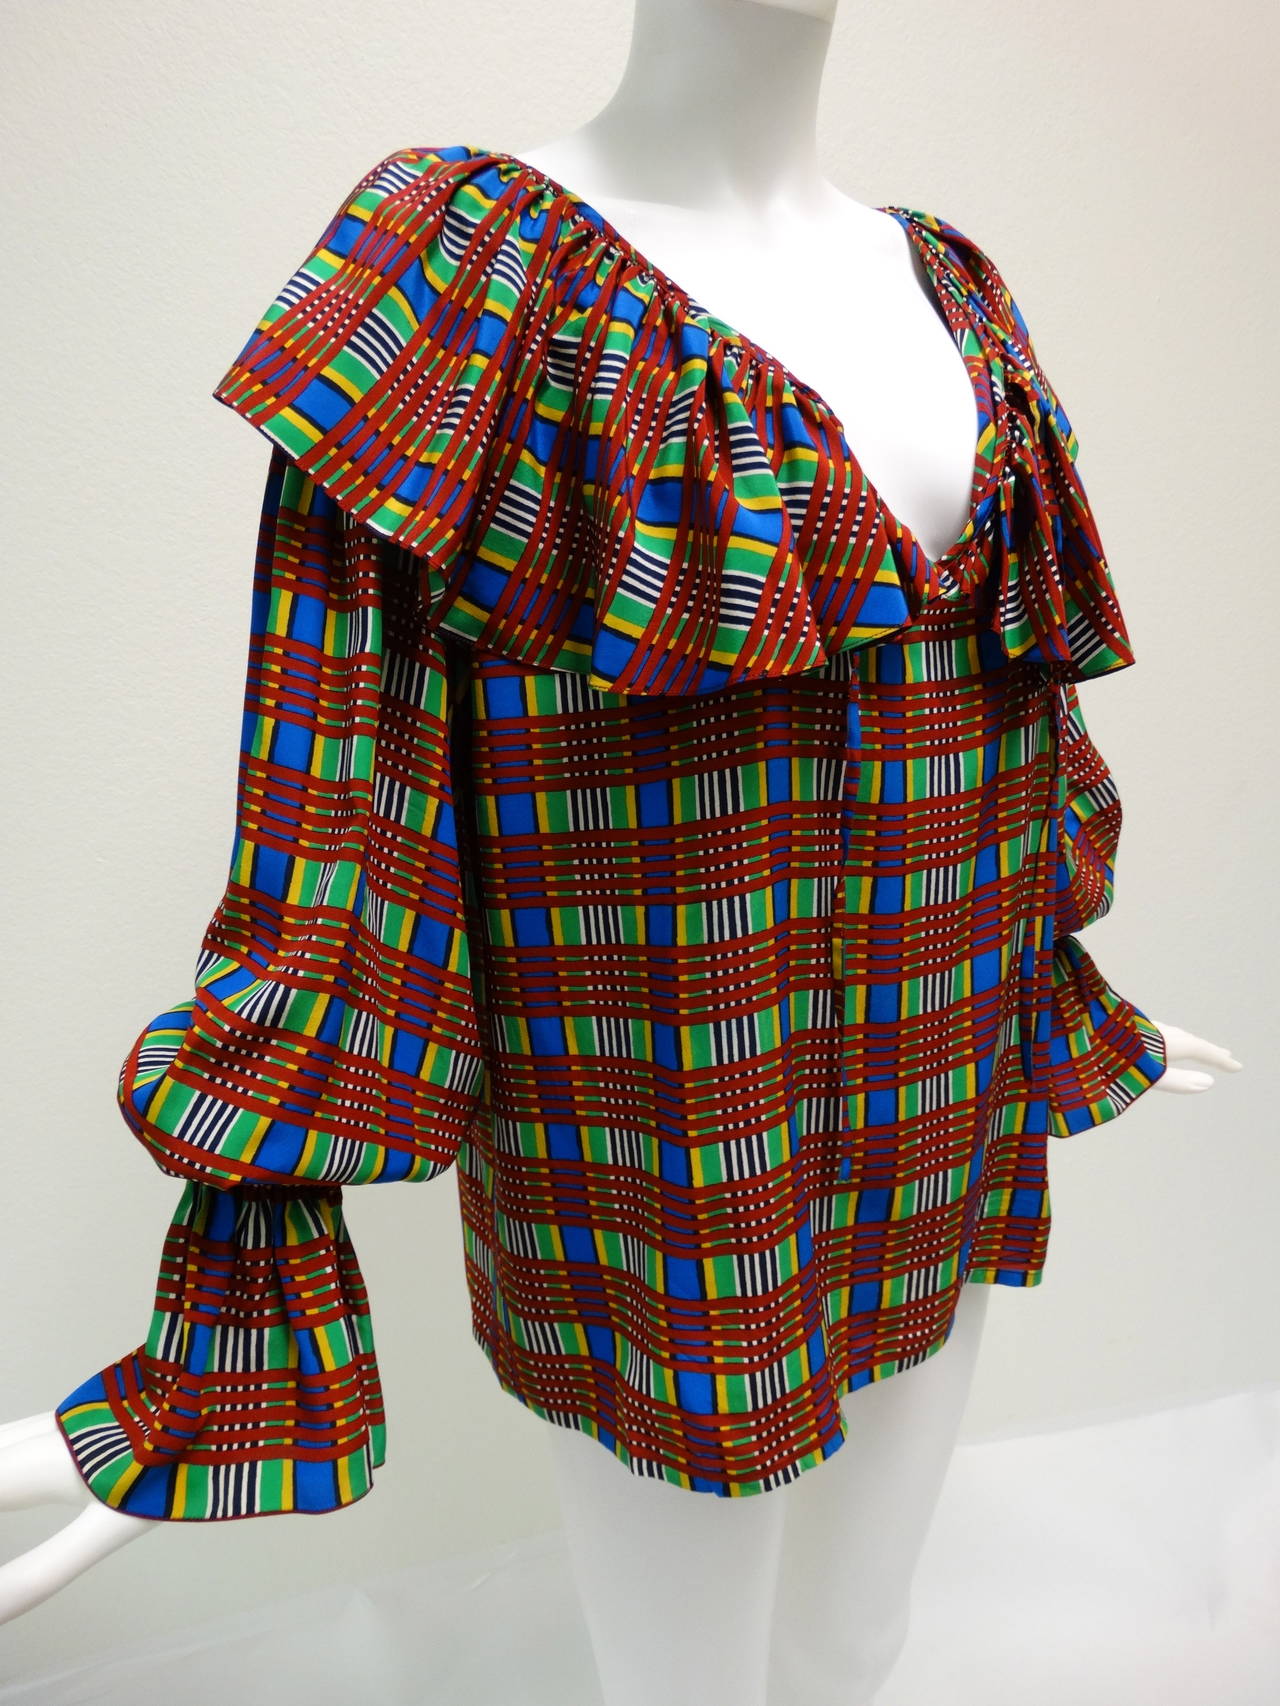 Vintage Yves Saint Laurent maroon, bright green, royal blue, black, white and gold raw silk peasant sleeve blouse featuring an all over plaid print. Ties at the neckline, trimmed with a large ruffle  and micro pleating. Size 40 EU = 4/ 6 US